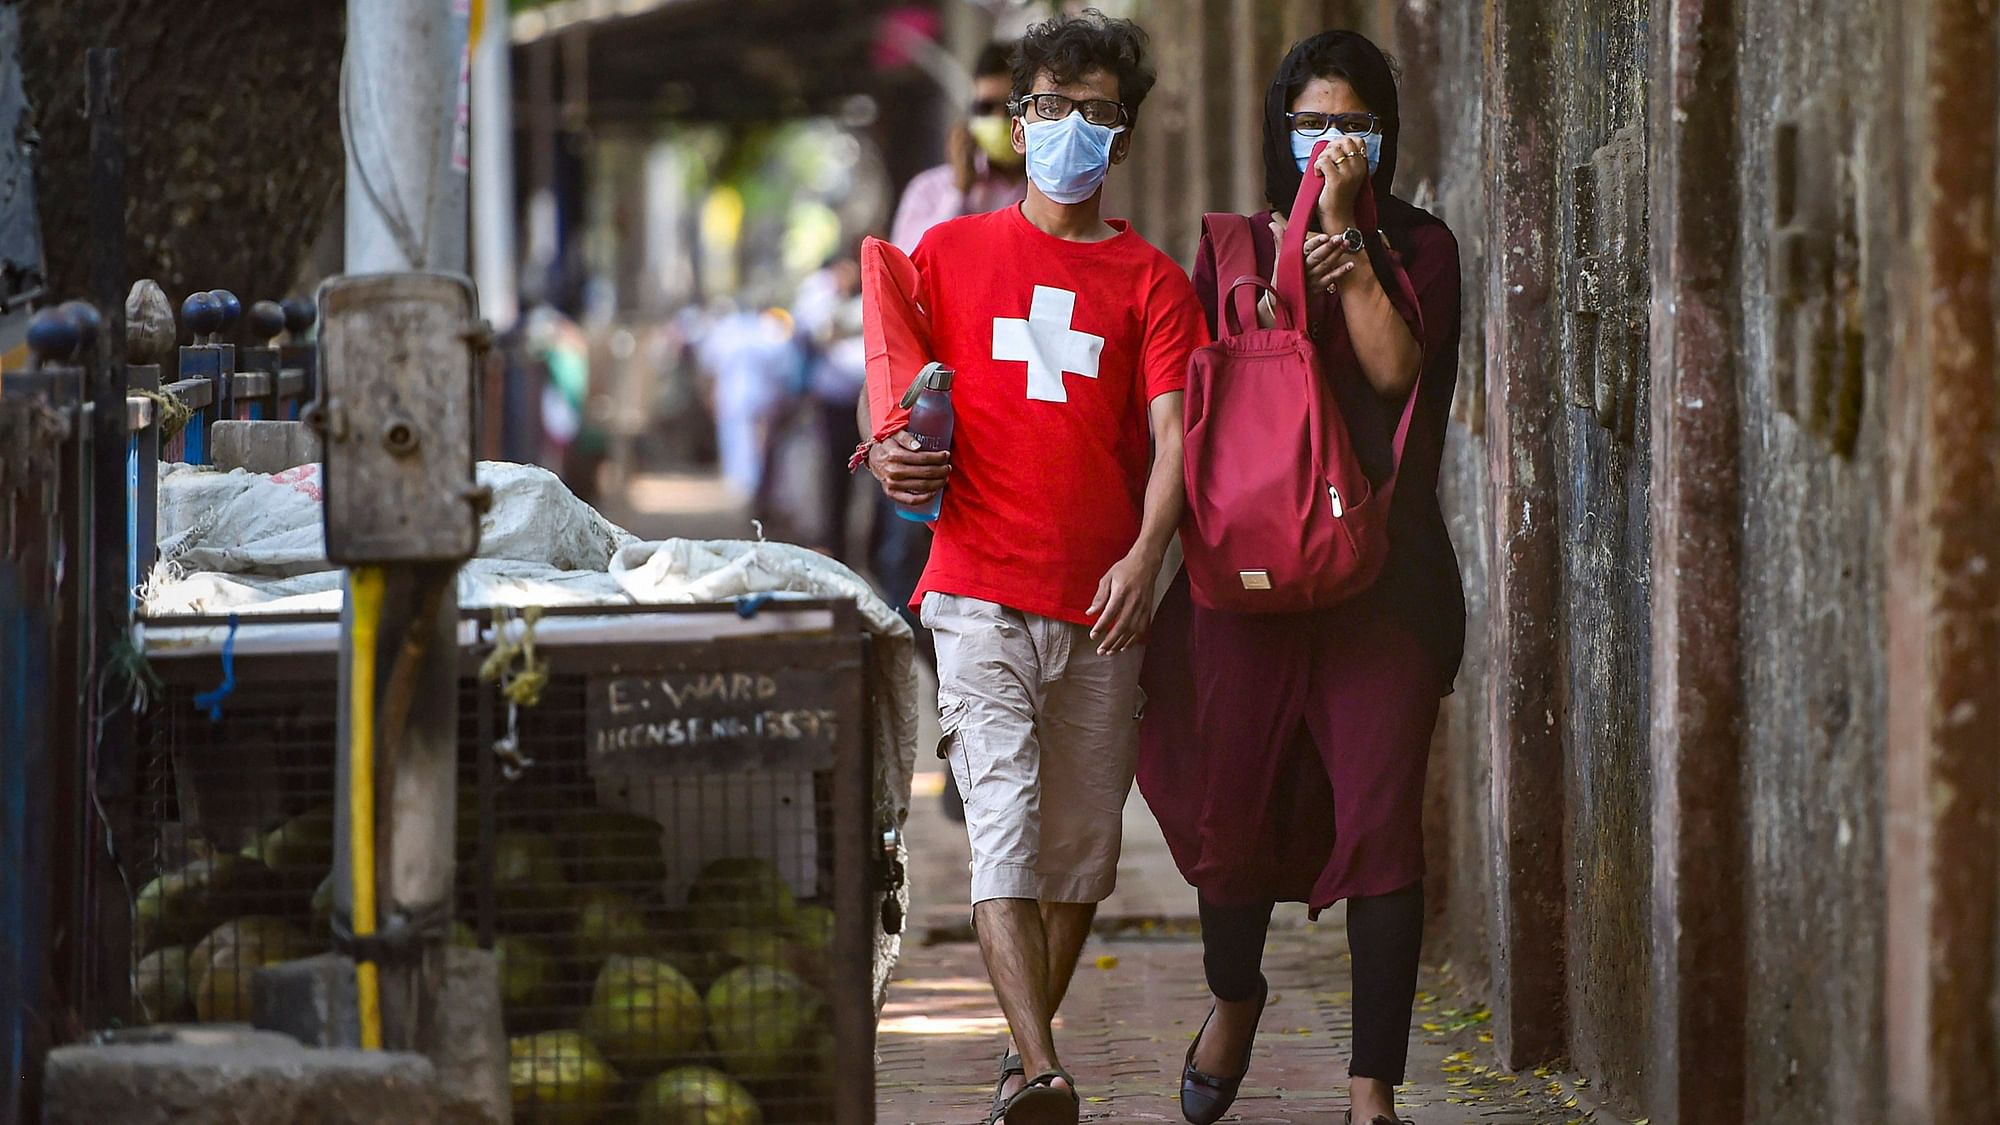  It’s compulsory to wear masks at public places in Mumbai now. Photo for representation purpose.